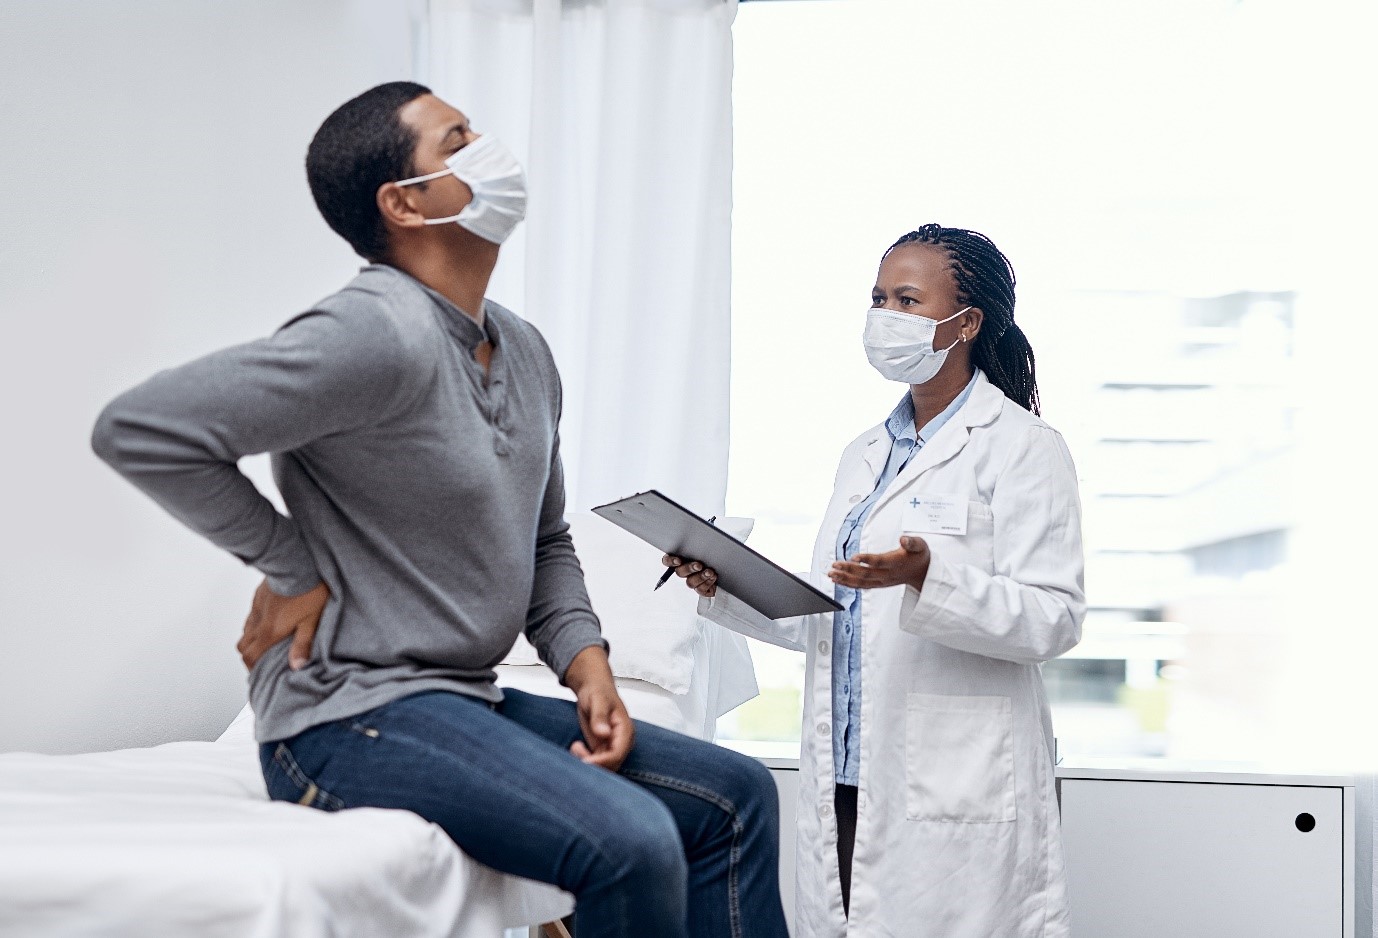 Image showing the doctor having a consultation with a patient suffering from back pain.